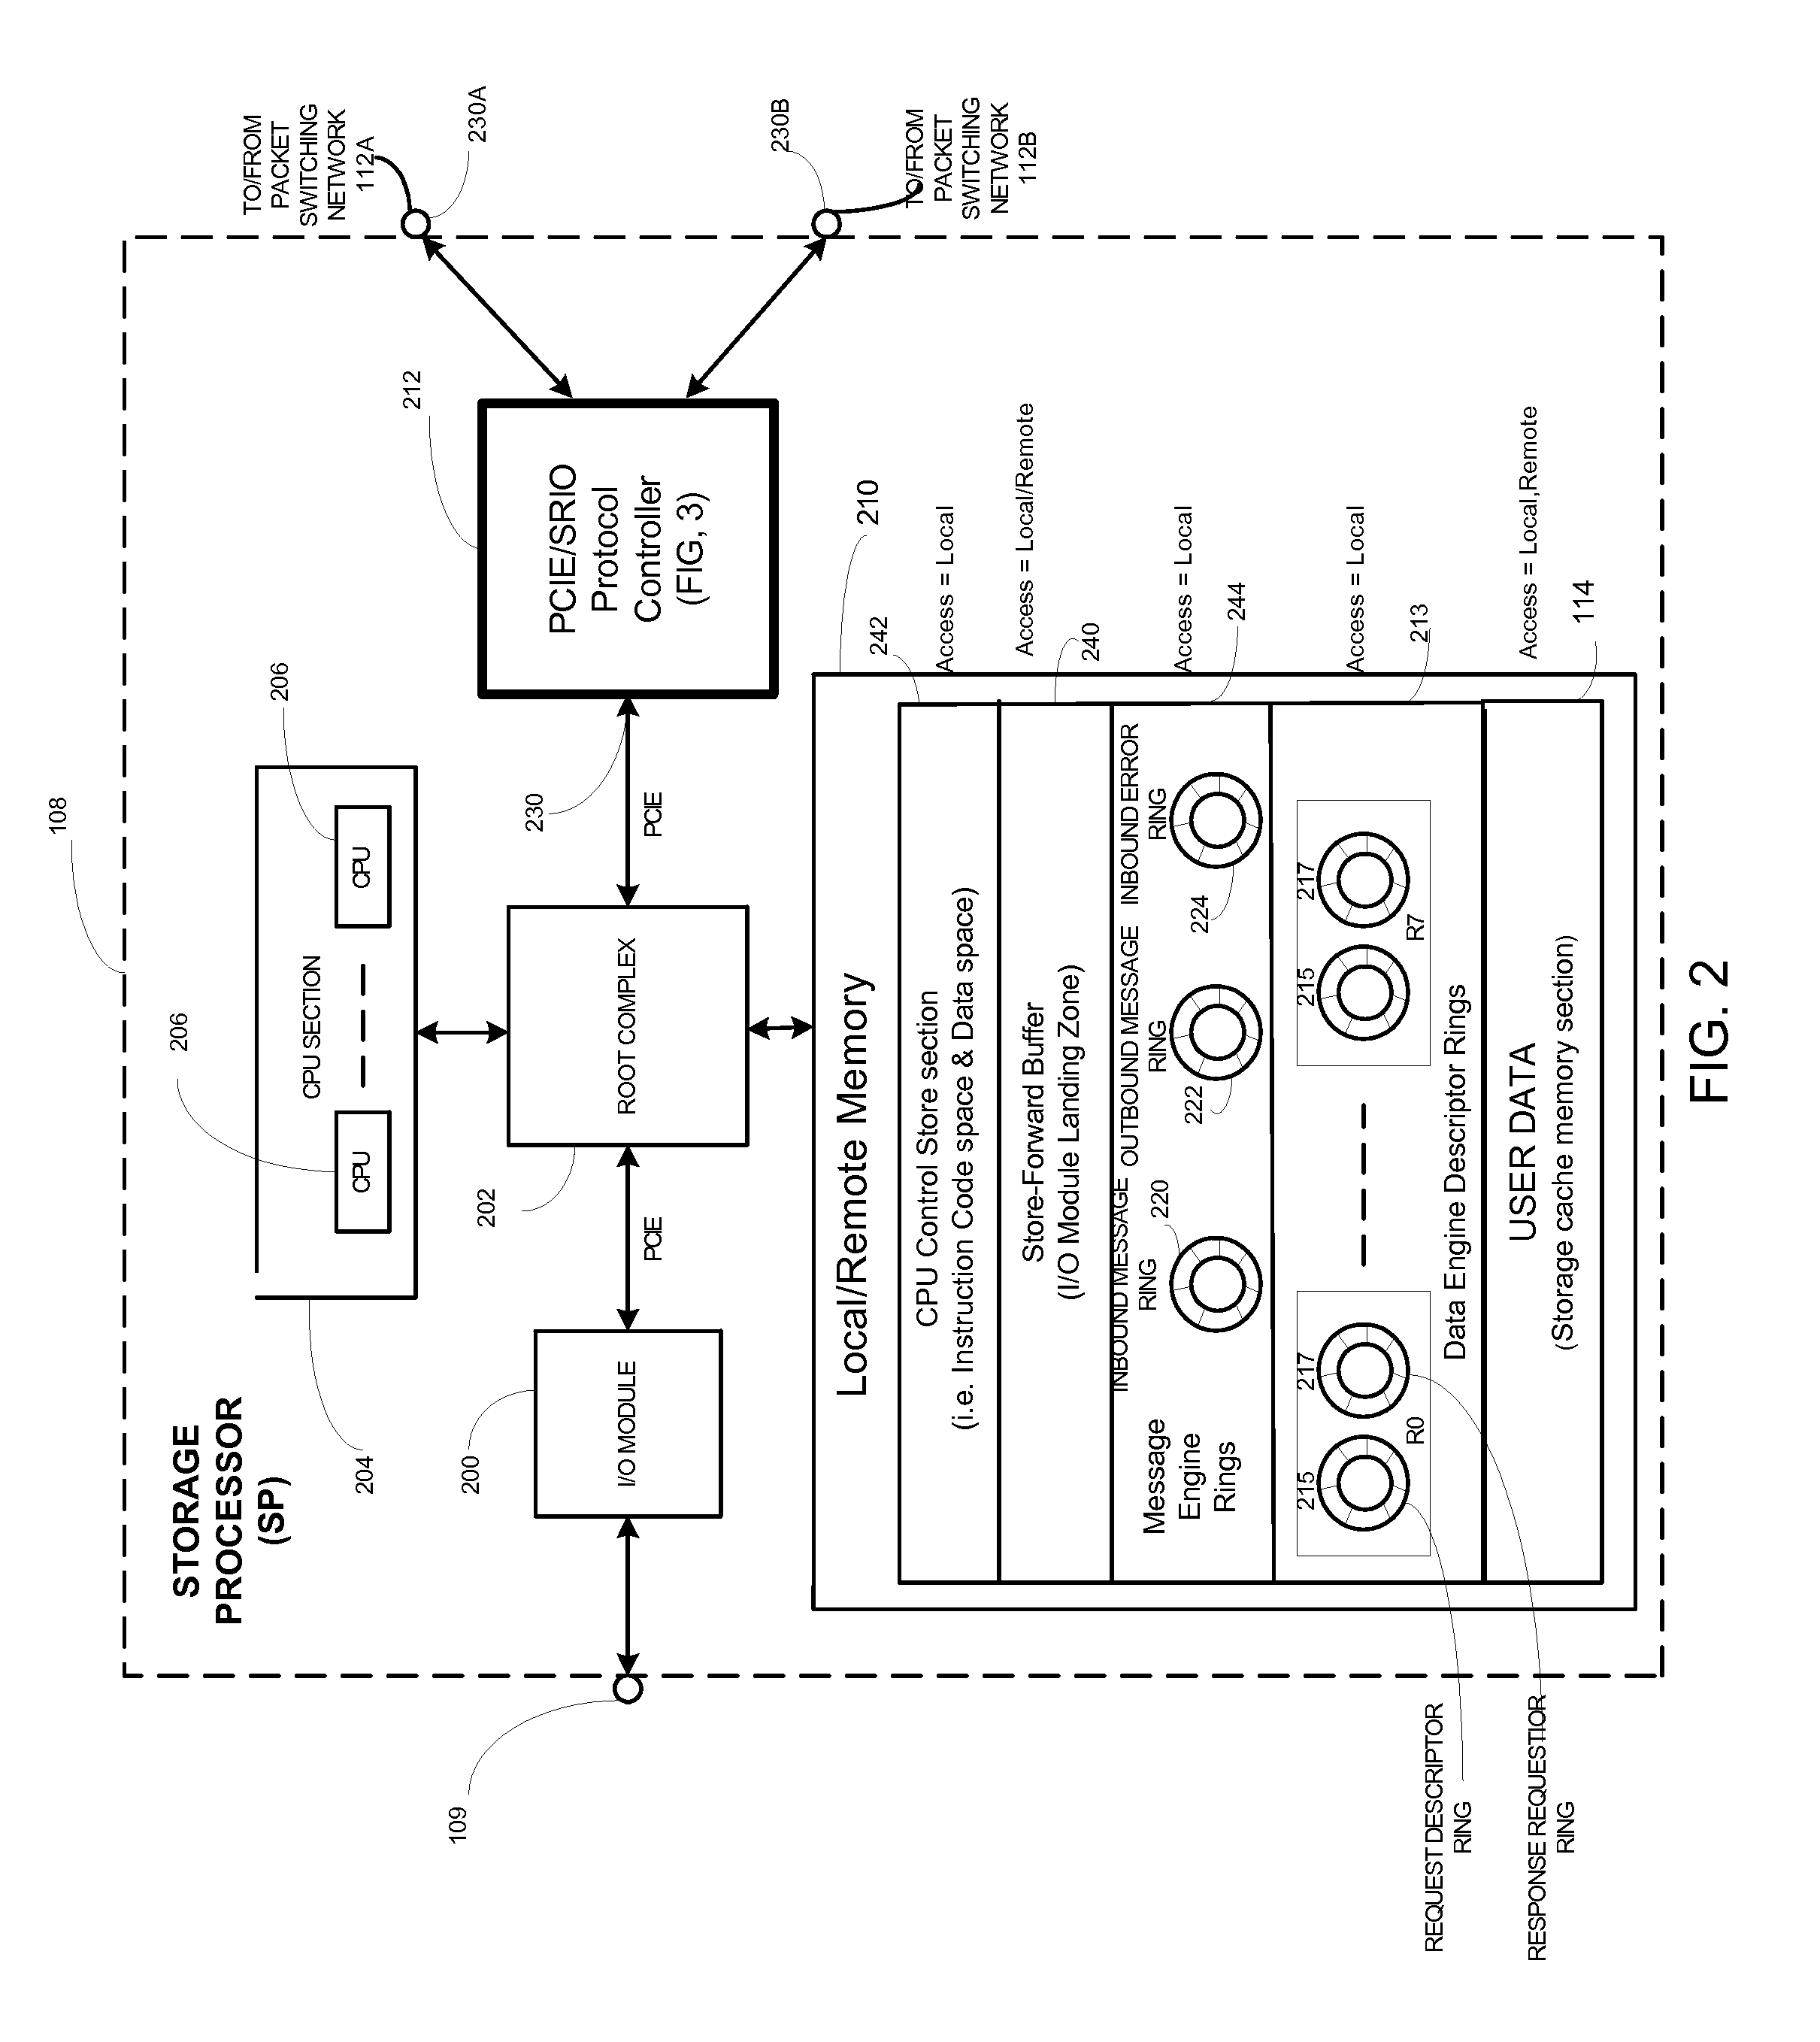 Method of operating a data storage system having plural data pipes